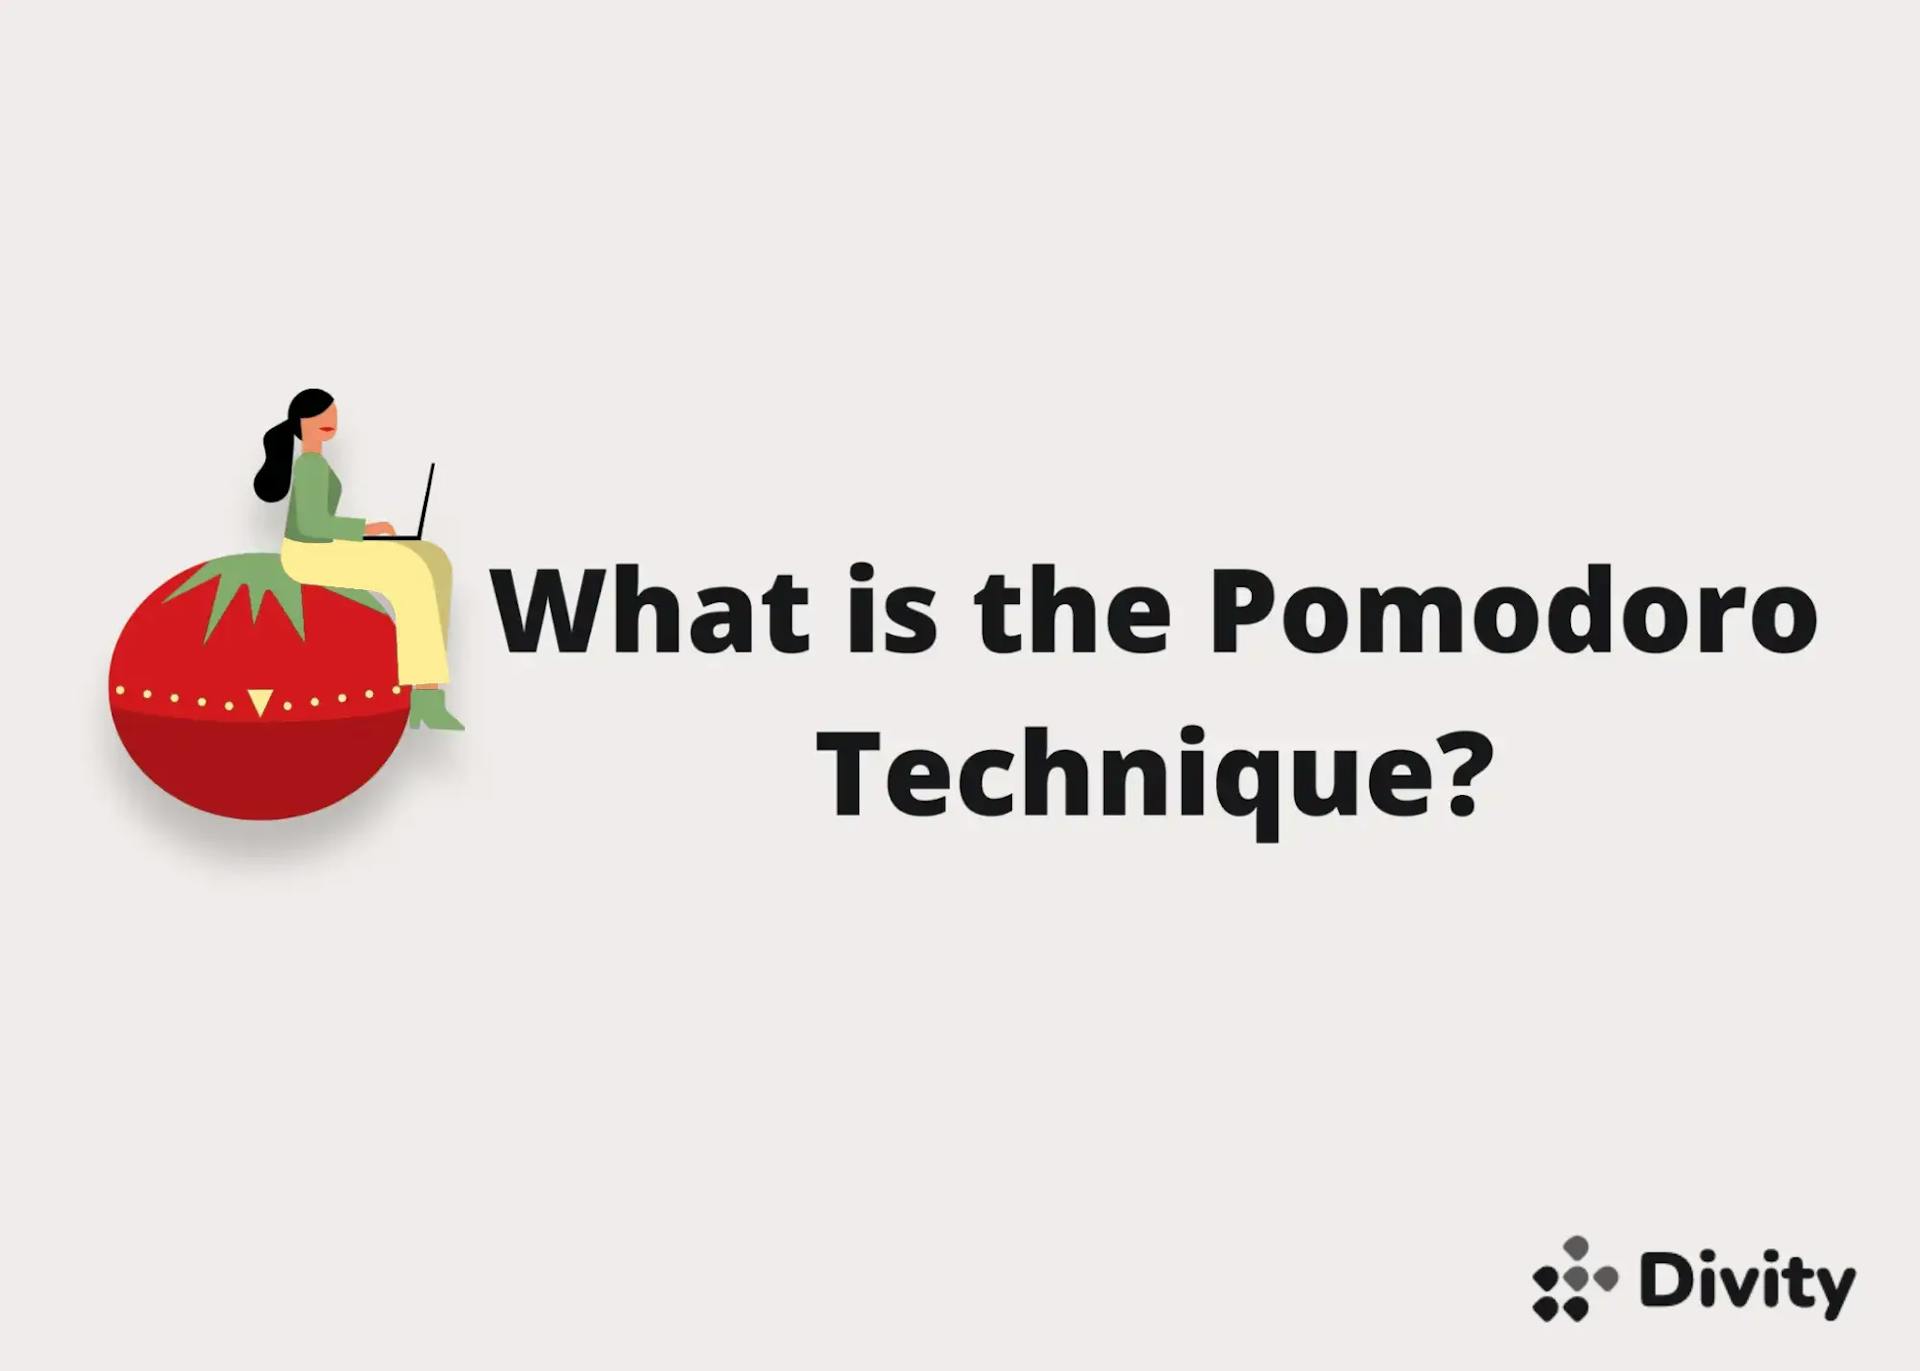 Image illustrating text "What is the Pomodoro Technique?"